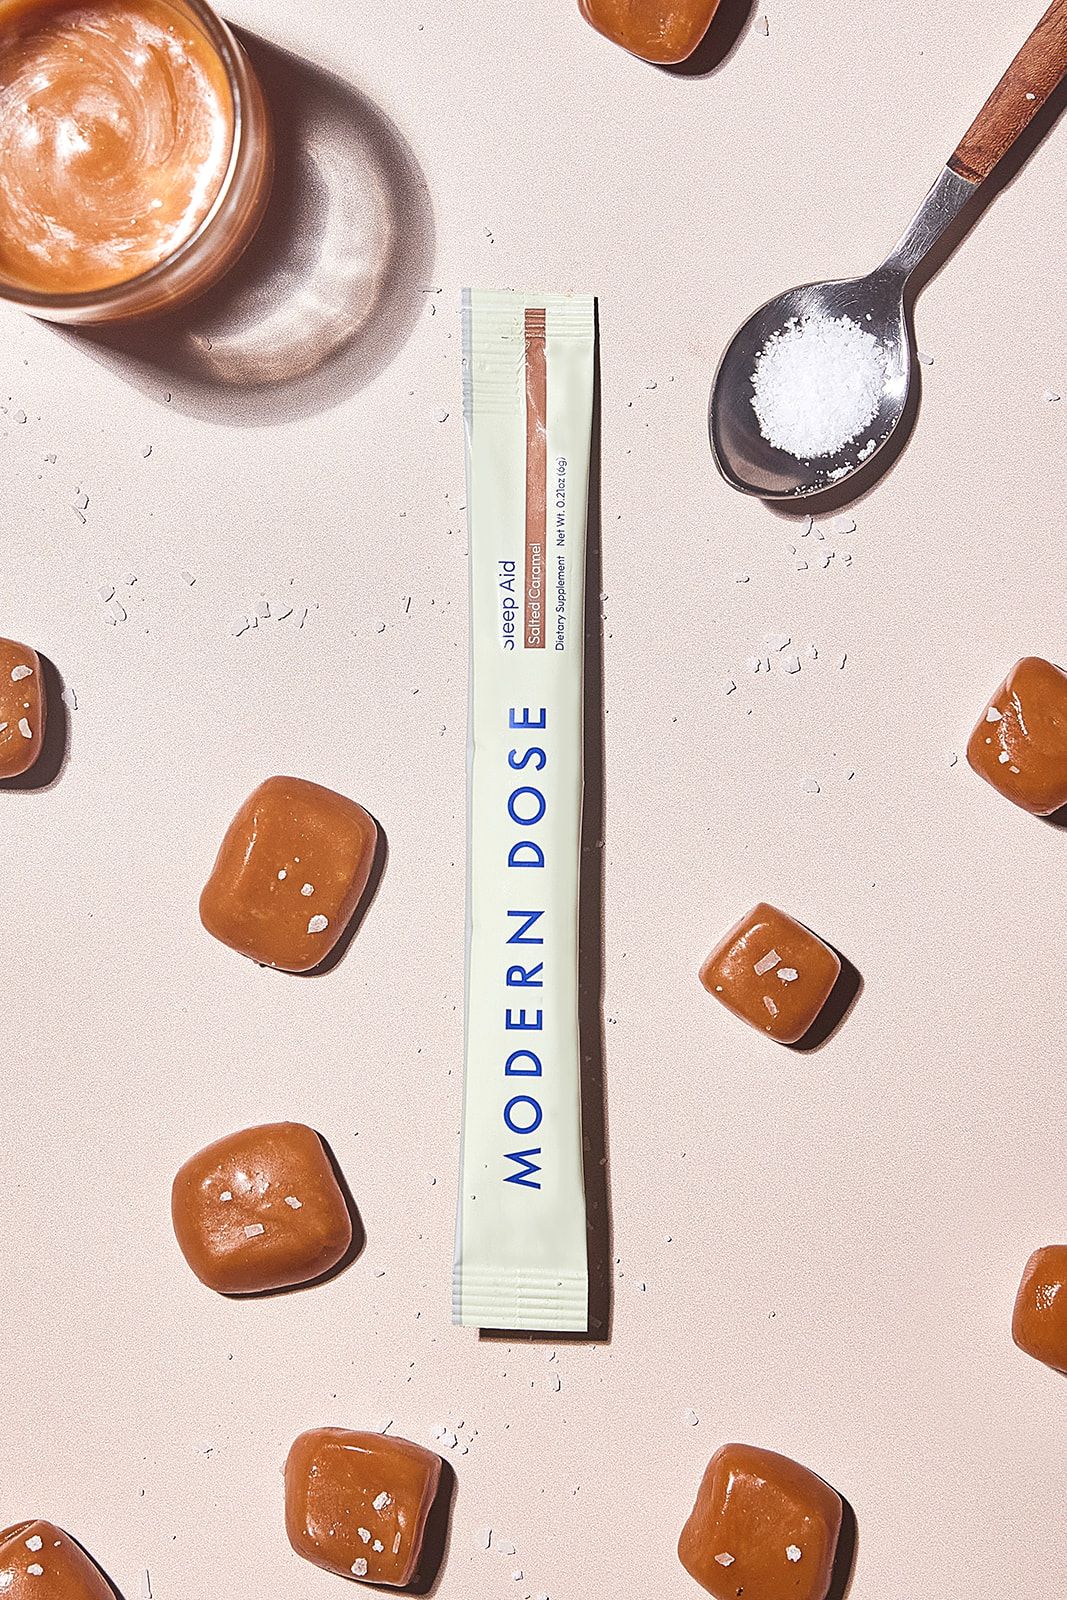 Modern Dose Sleep Aid Salted Caramel stick pack surrounded by caramel and a spoon full of salt - www.moderndose.com